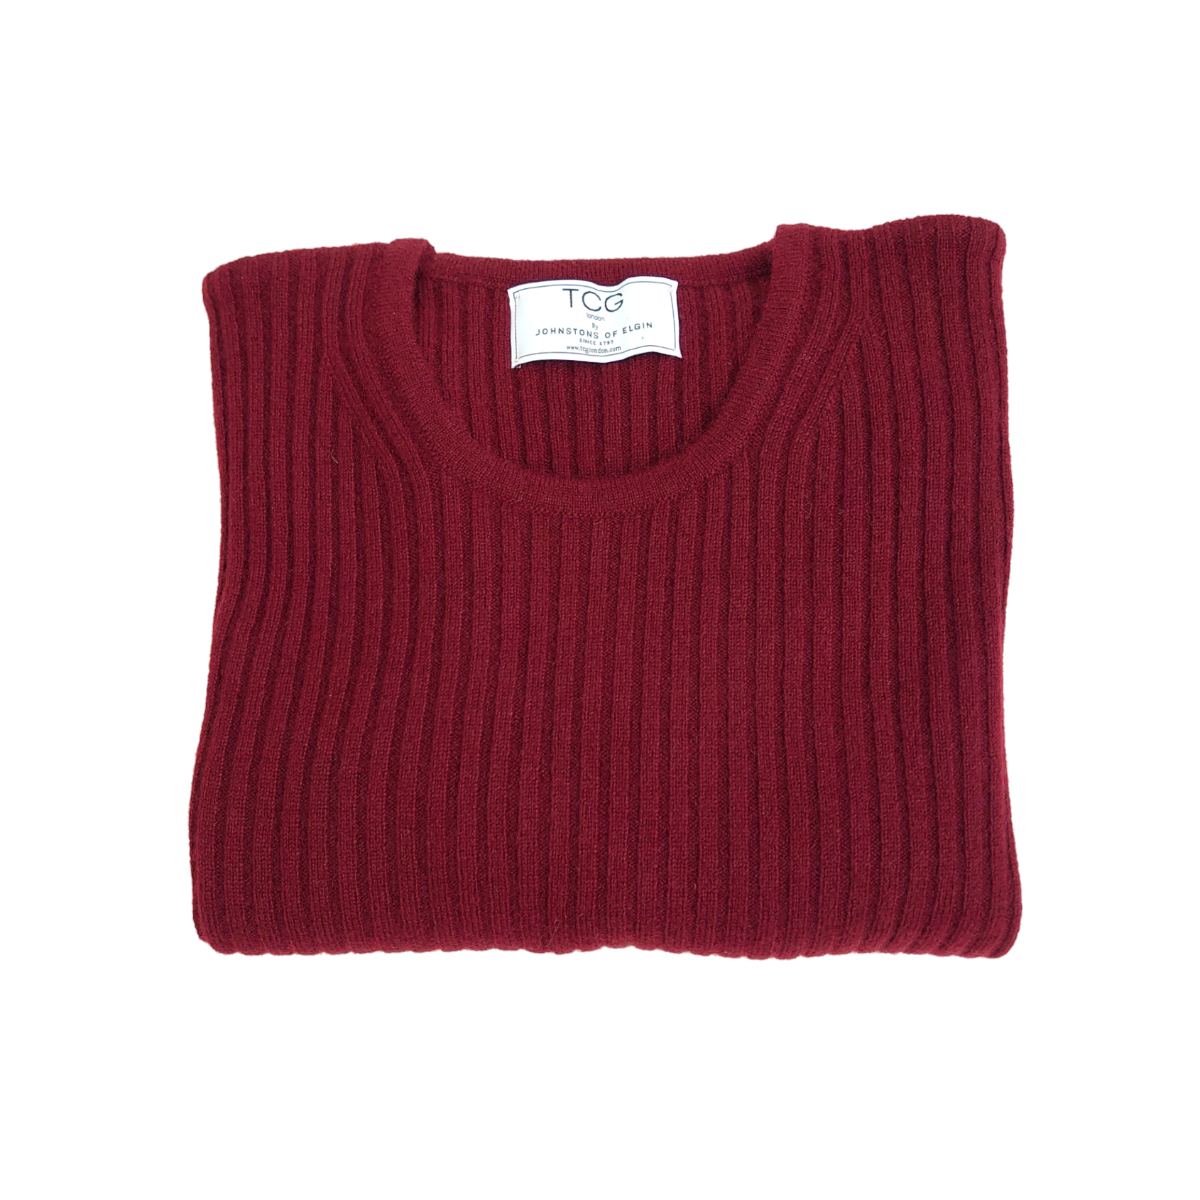 Ladies Ribbed Round Neck 100% Pure Cashmere Jumper - Maroon Red - S